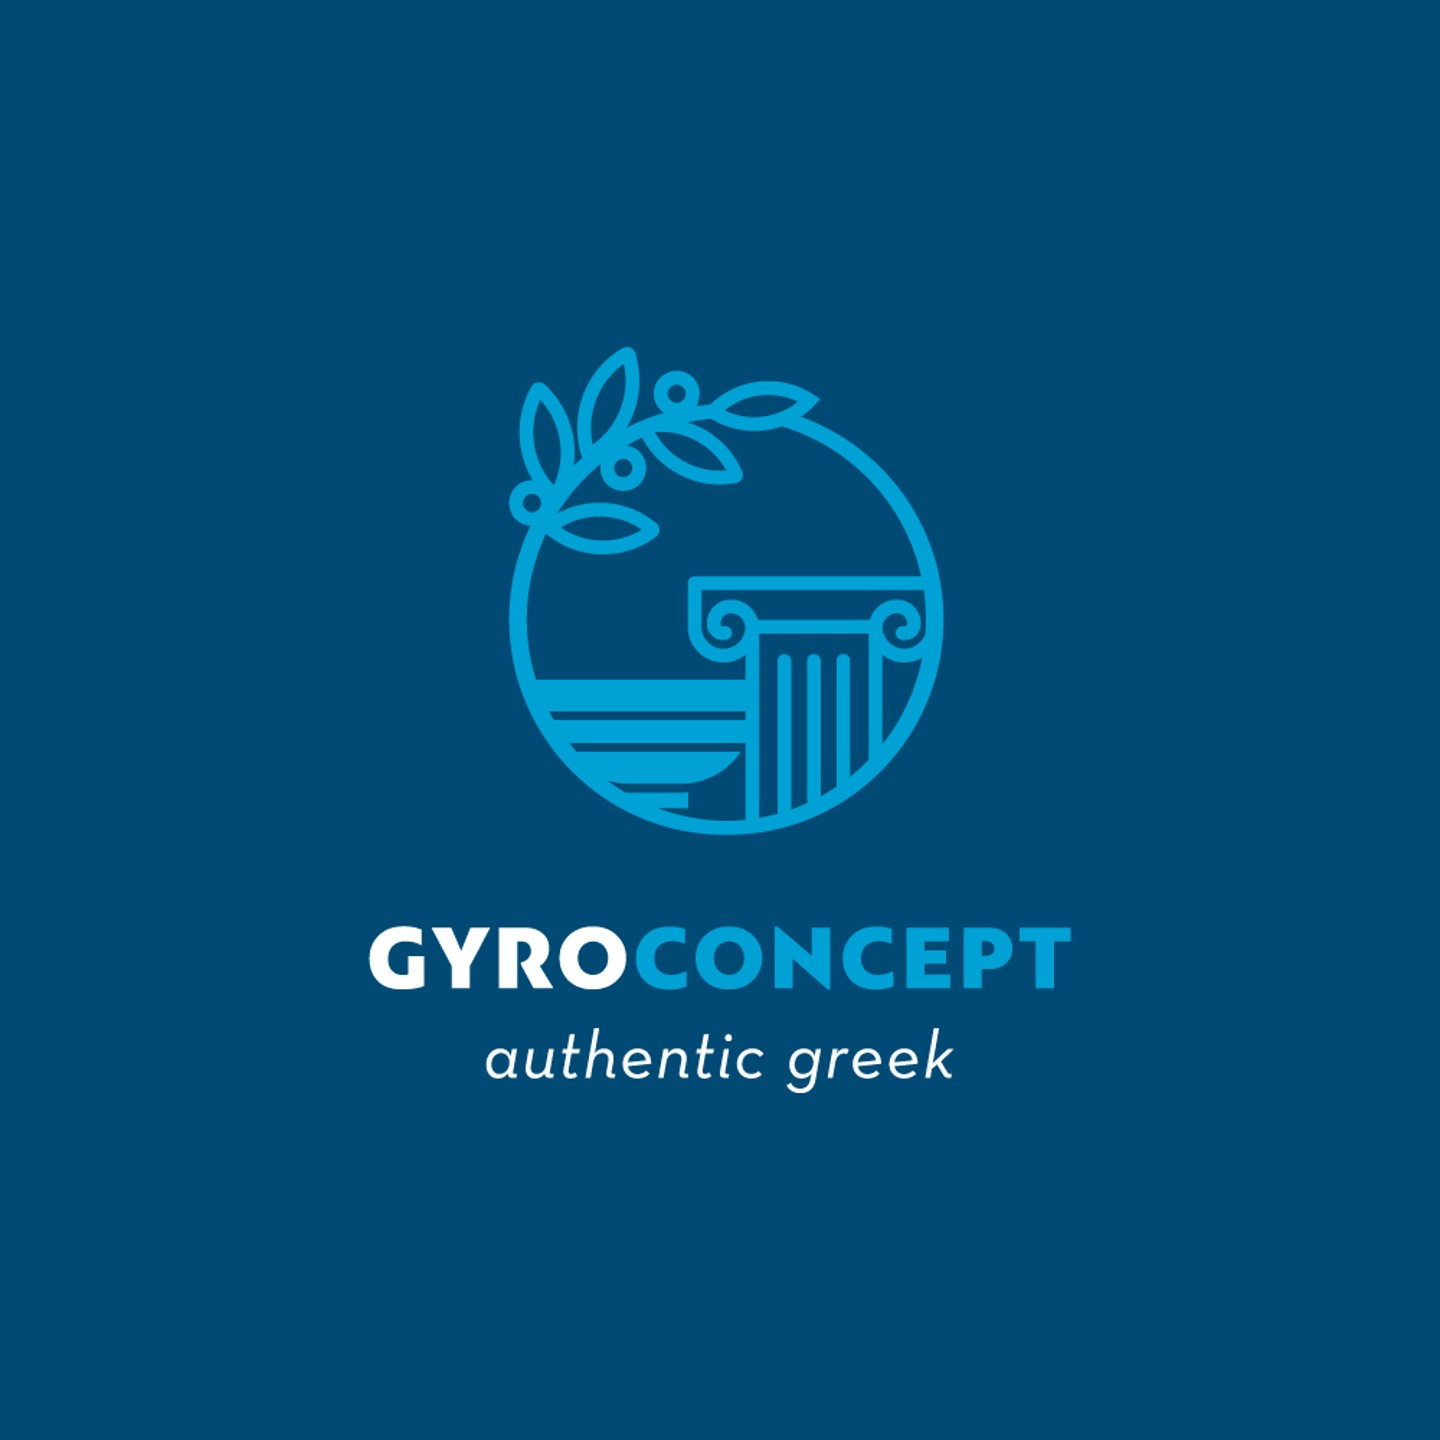 Welcome to Gyro Concept